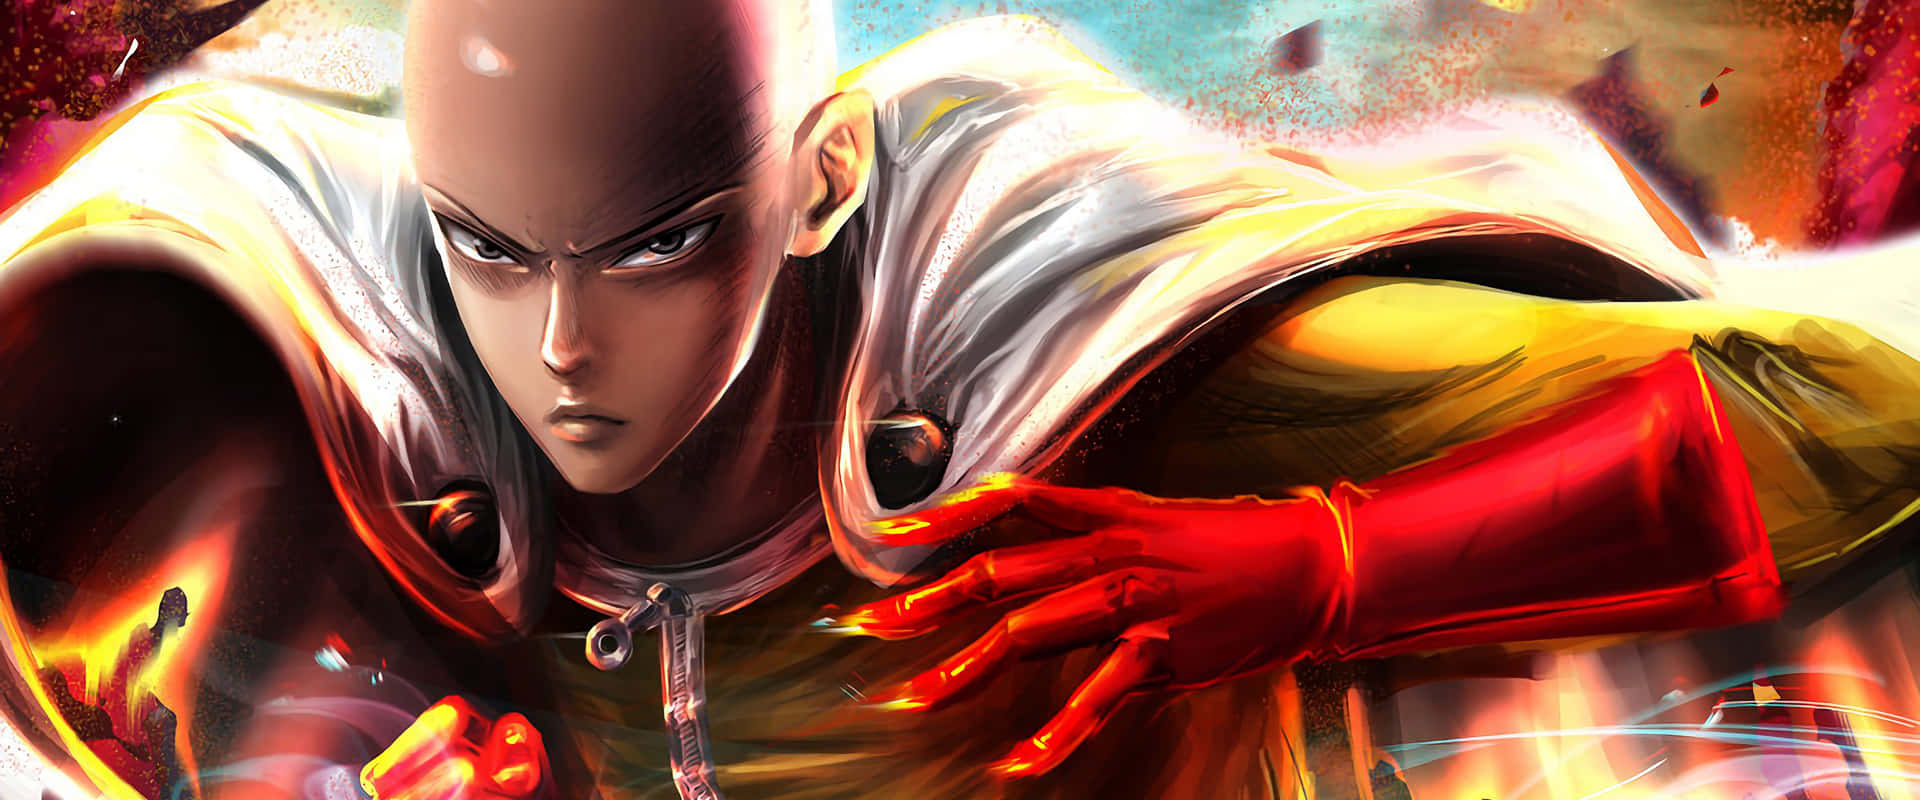 “One Punch Man: Ready to Take on Any Challenge”